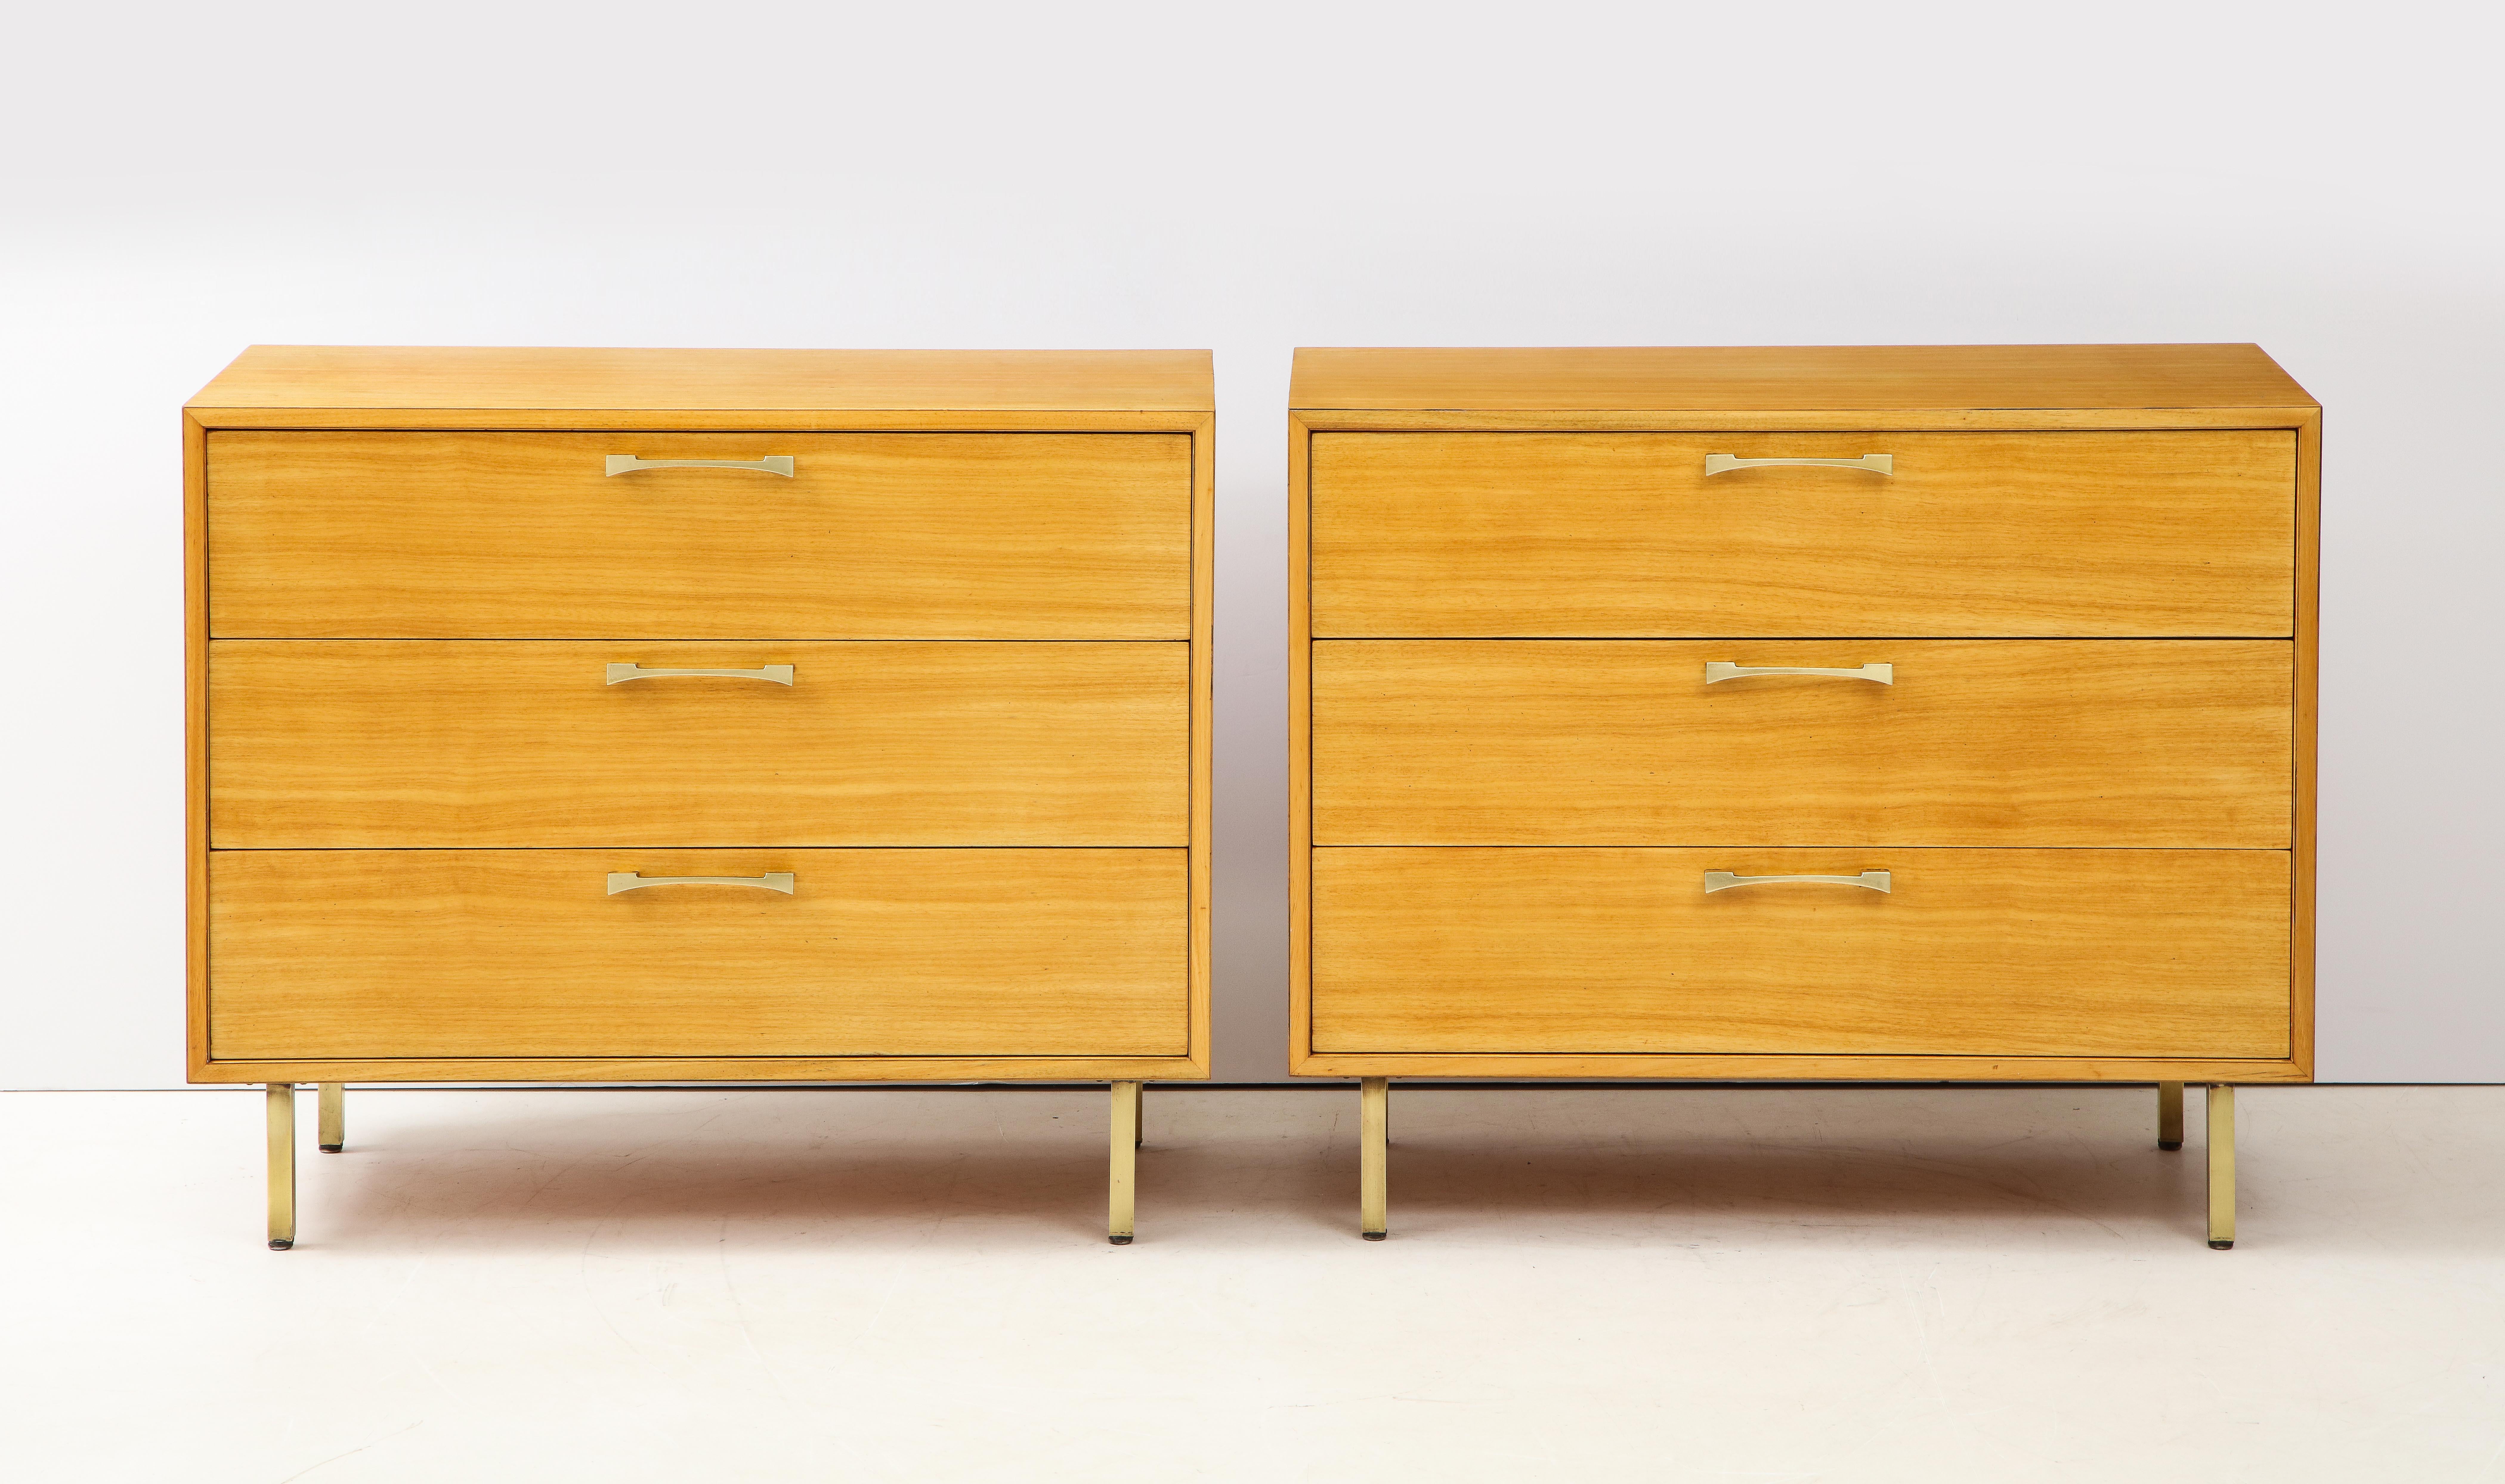 Stunning pair of 1950s 3-drawer dressers by Grosfeld House well made and very solid made of Primavera wood with solid brass handles and legs, lightly restored with minor wear and patina.